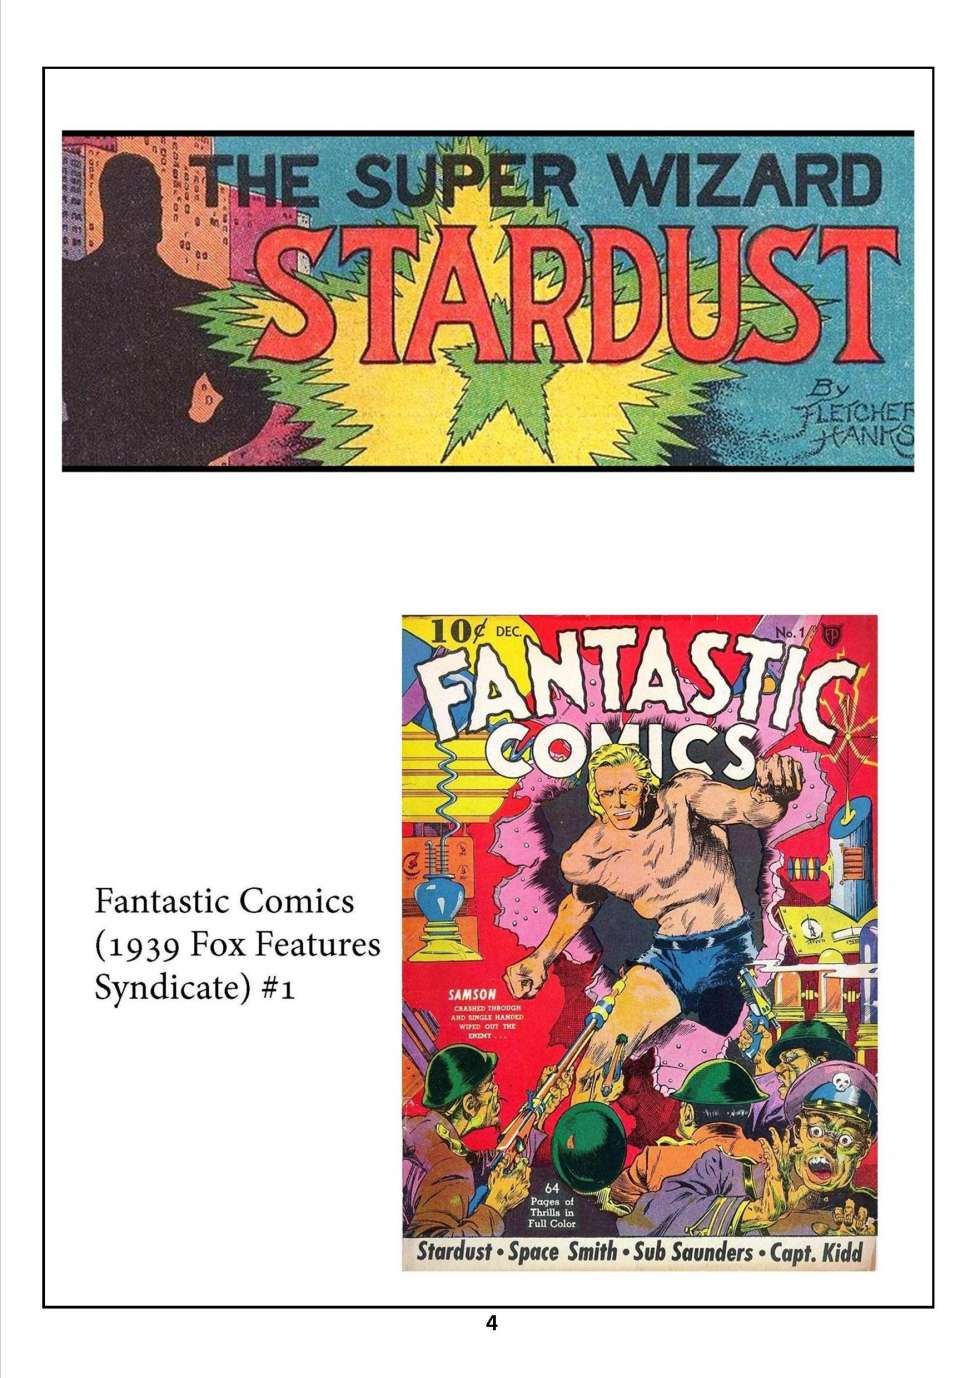 Comic Book Cover For Stardust, The Super Wizard